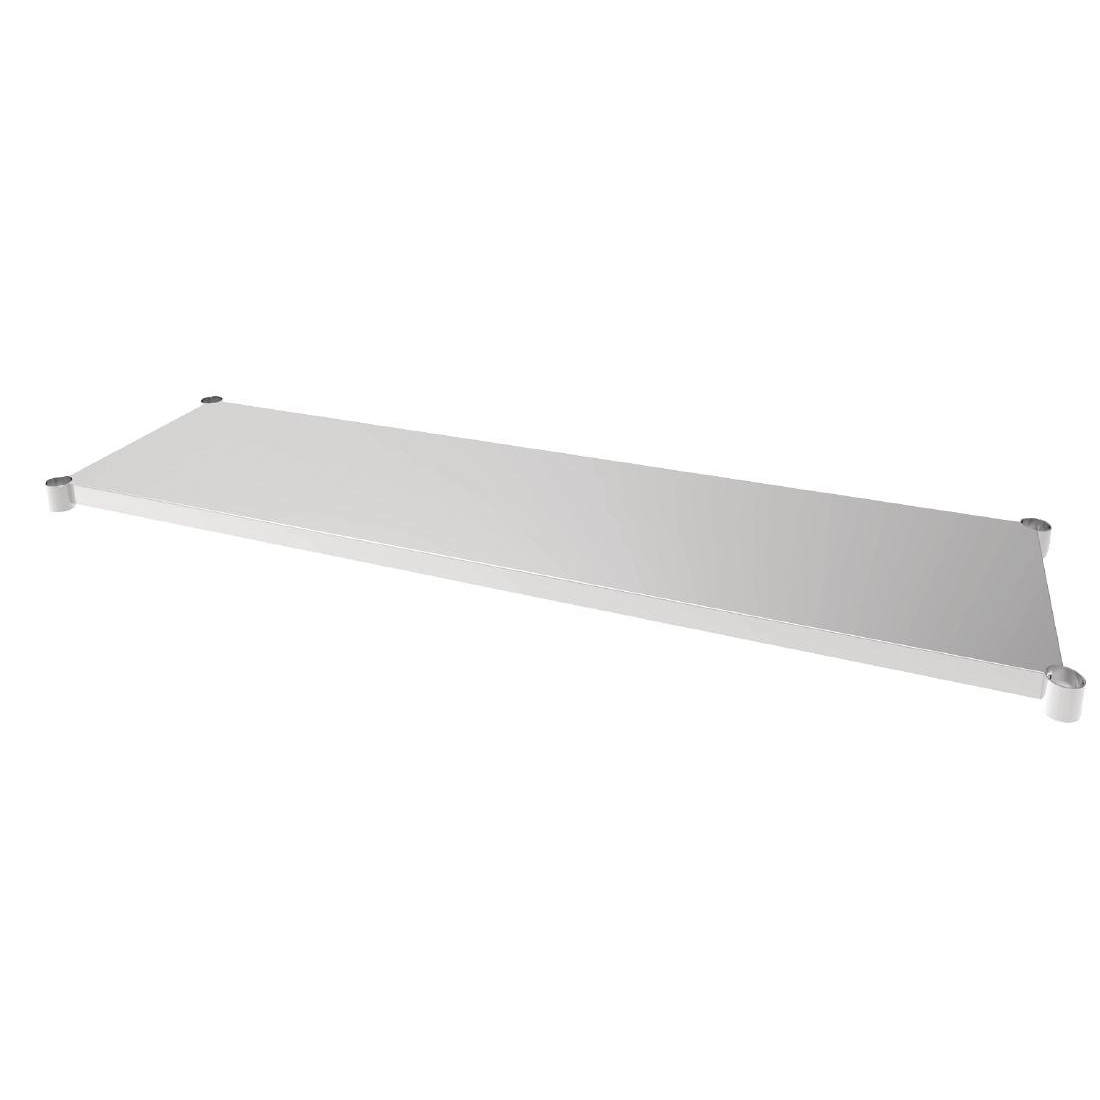 Vogue Stainless Steel Table Shelf 600x1800mm